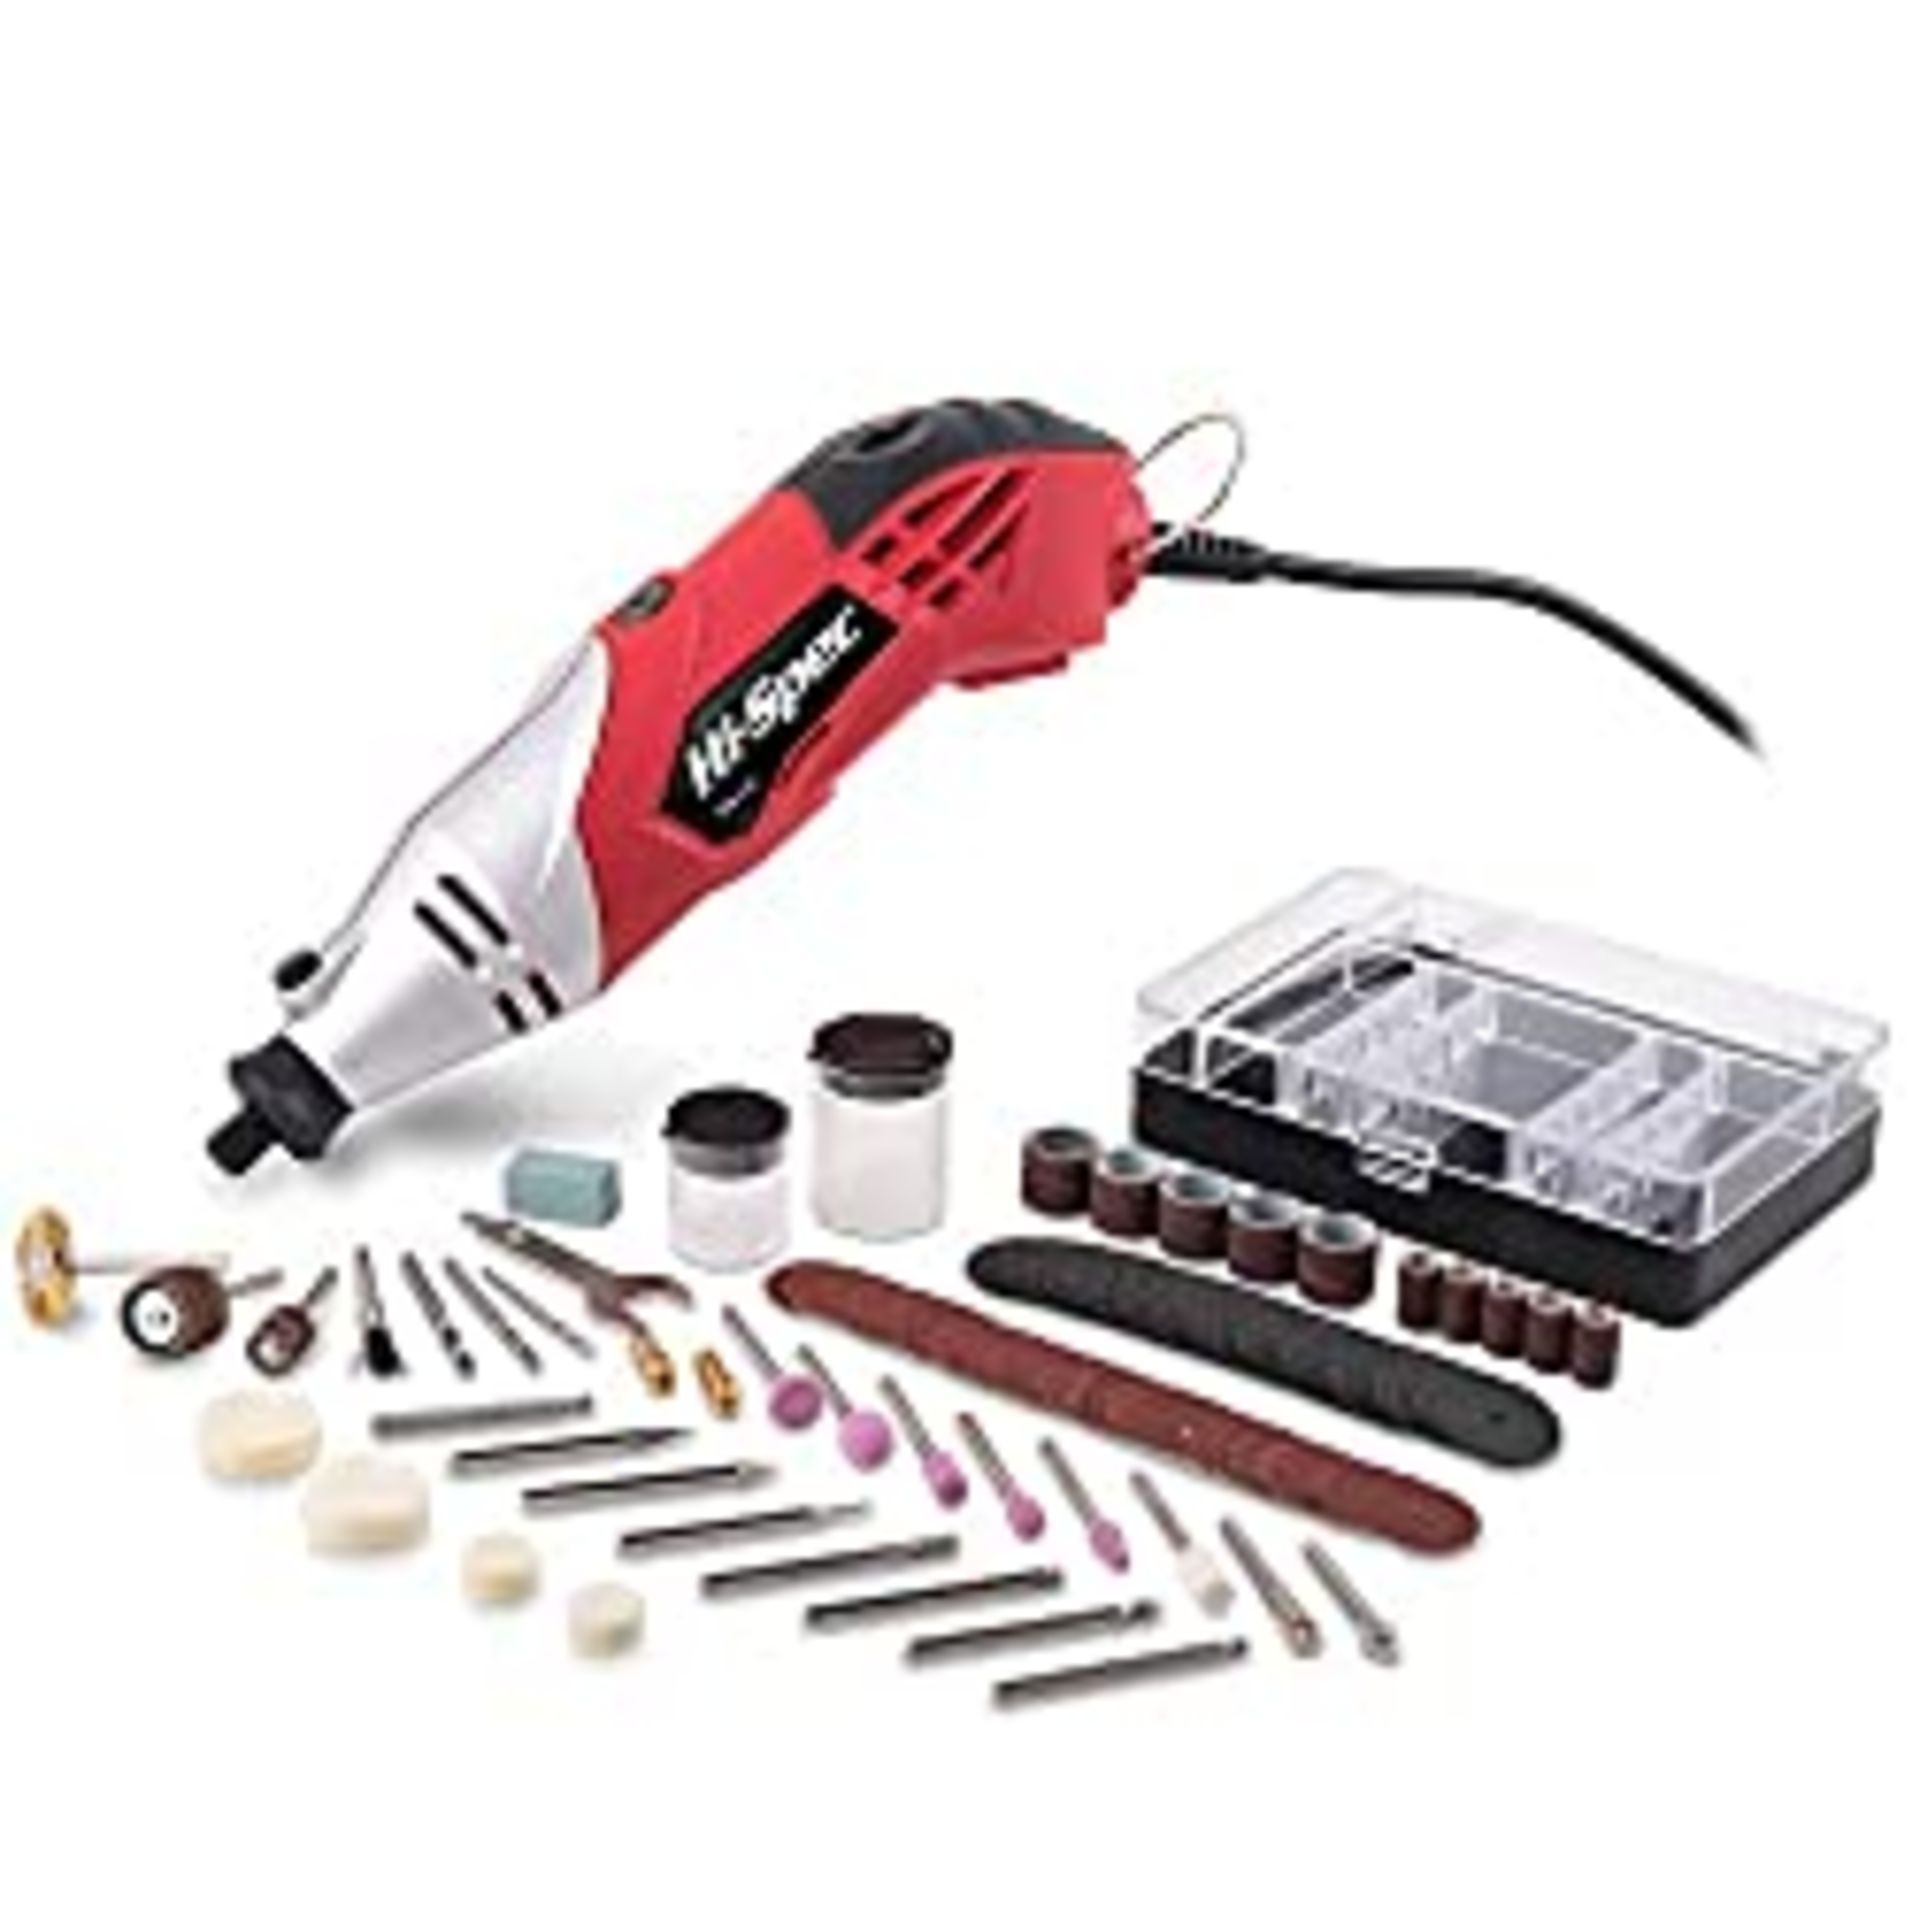 RRP £31.99 Hi-Spec Power Rotary Tool Kit Set 170W 1.4A with 121